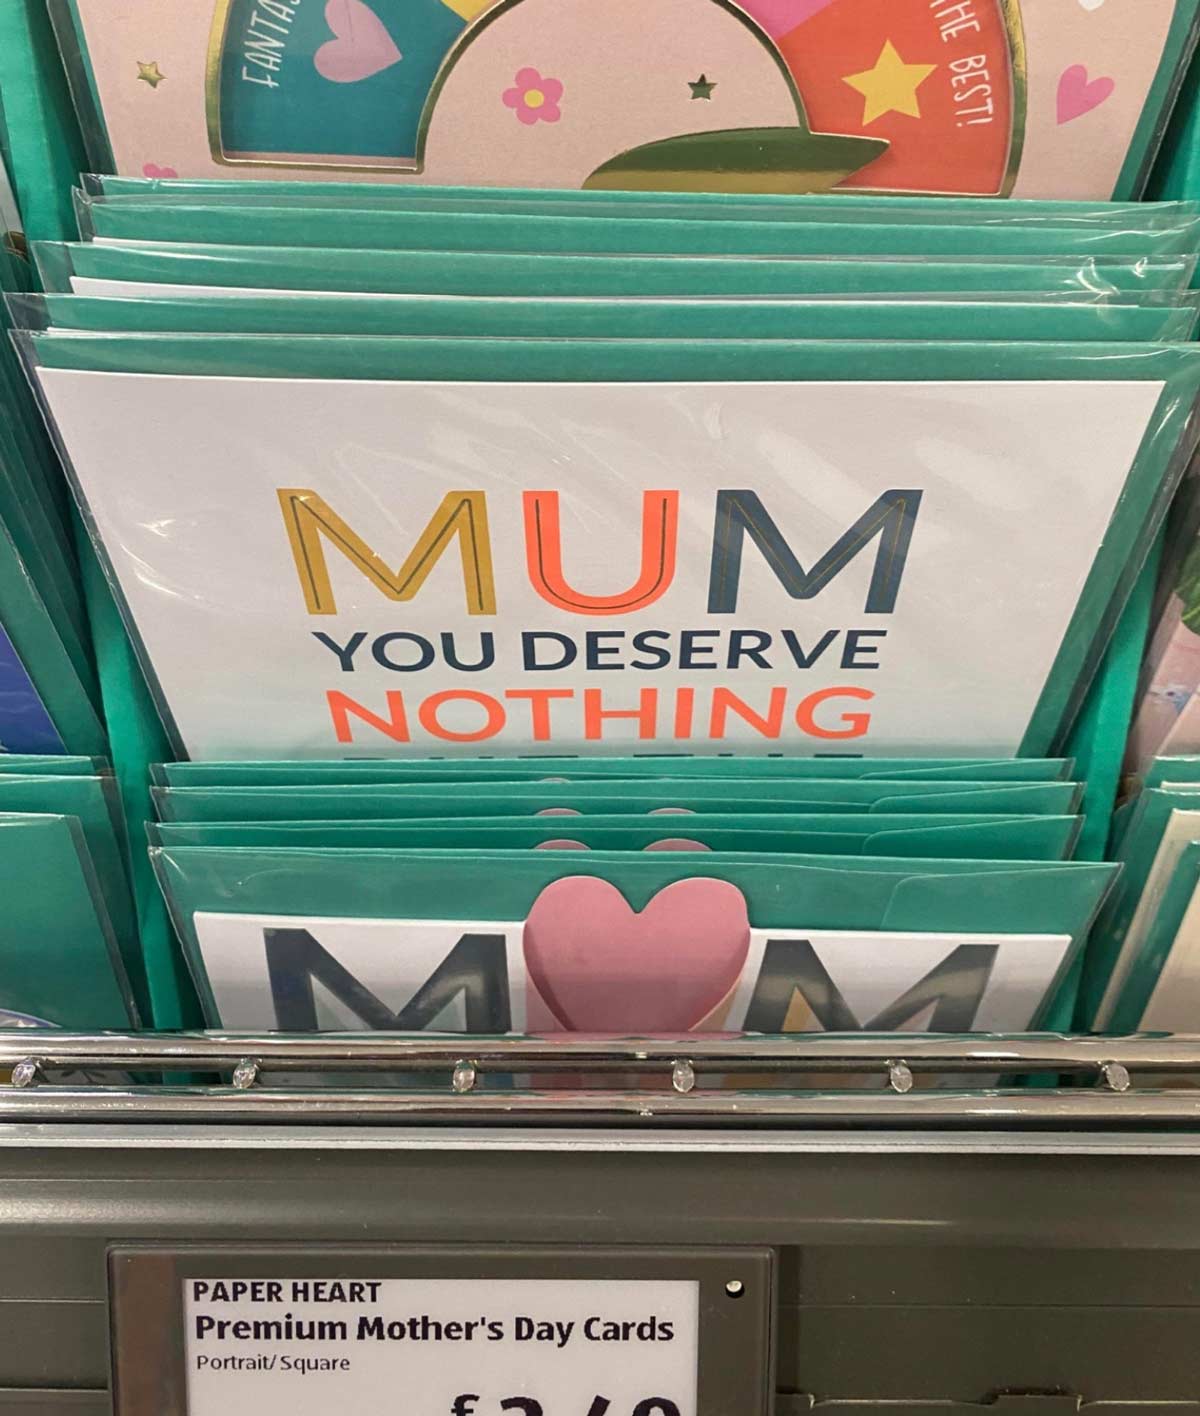 You are a terrible mum